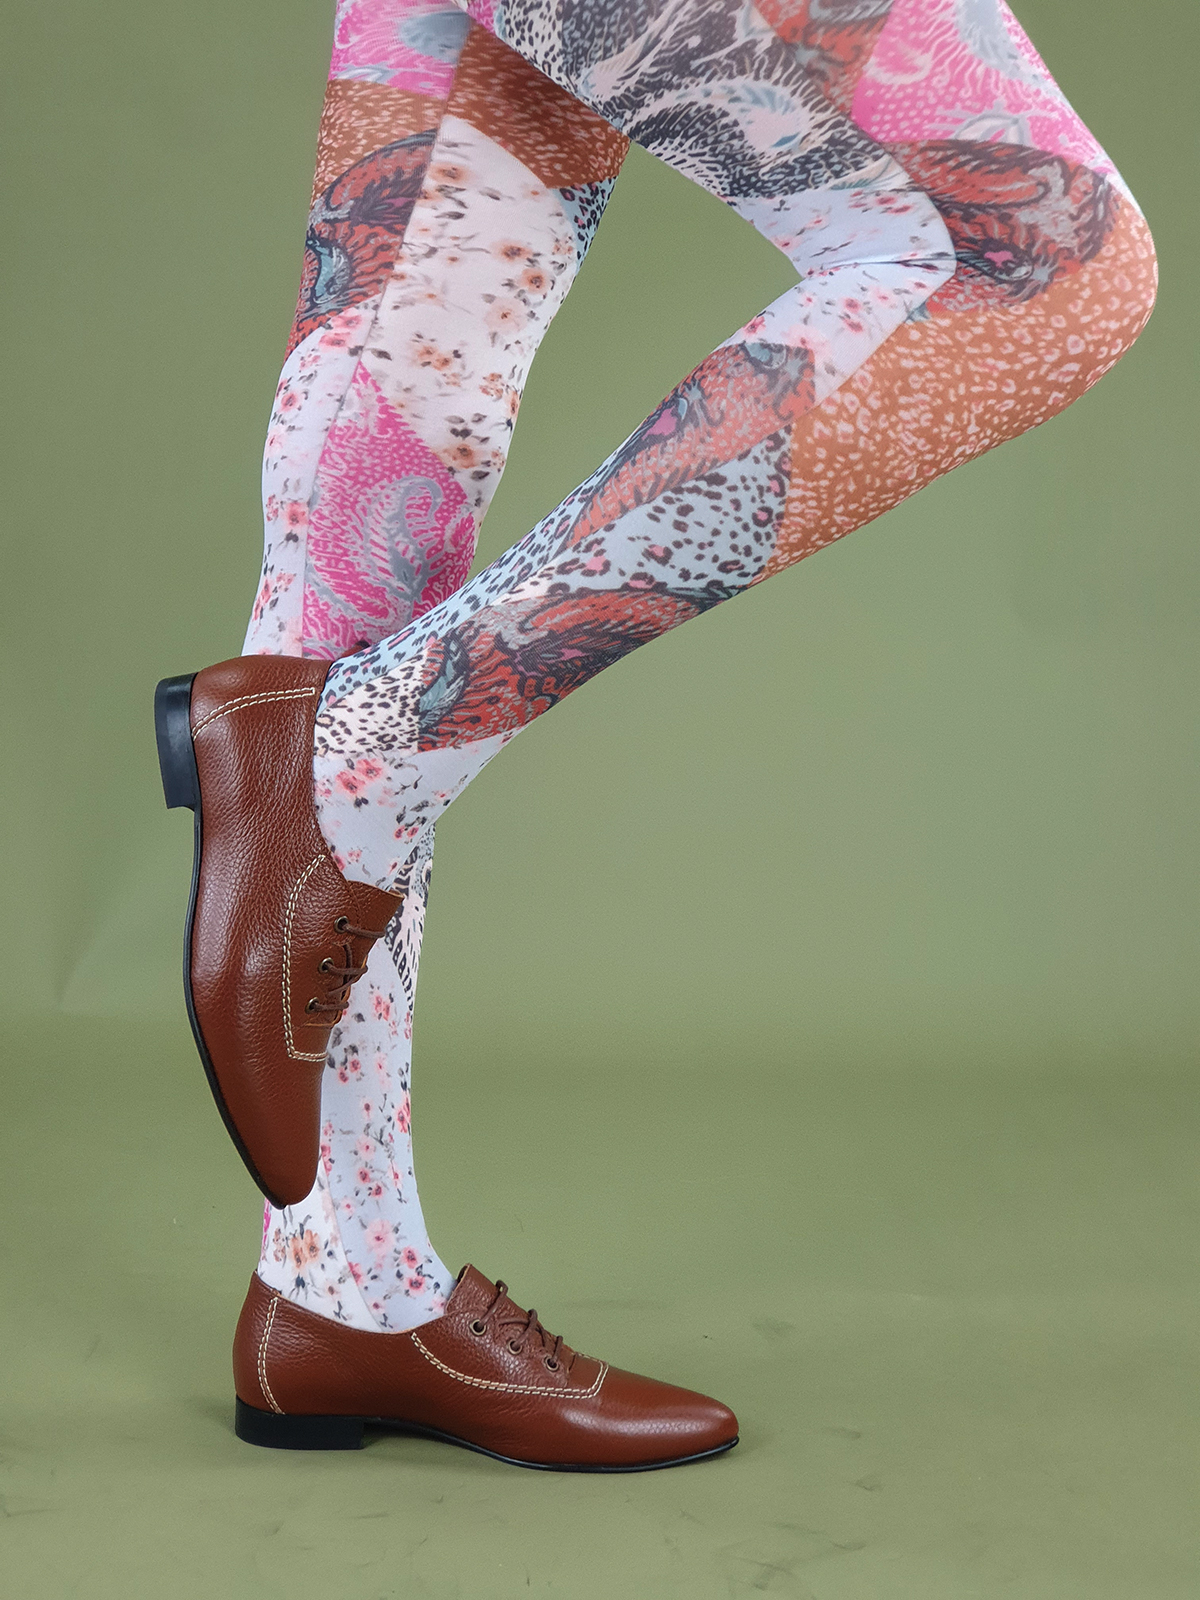 Paisley Tights – vintage retro 60's – 70's style – Mod Shoes